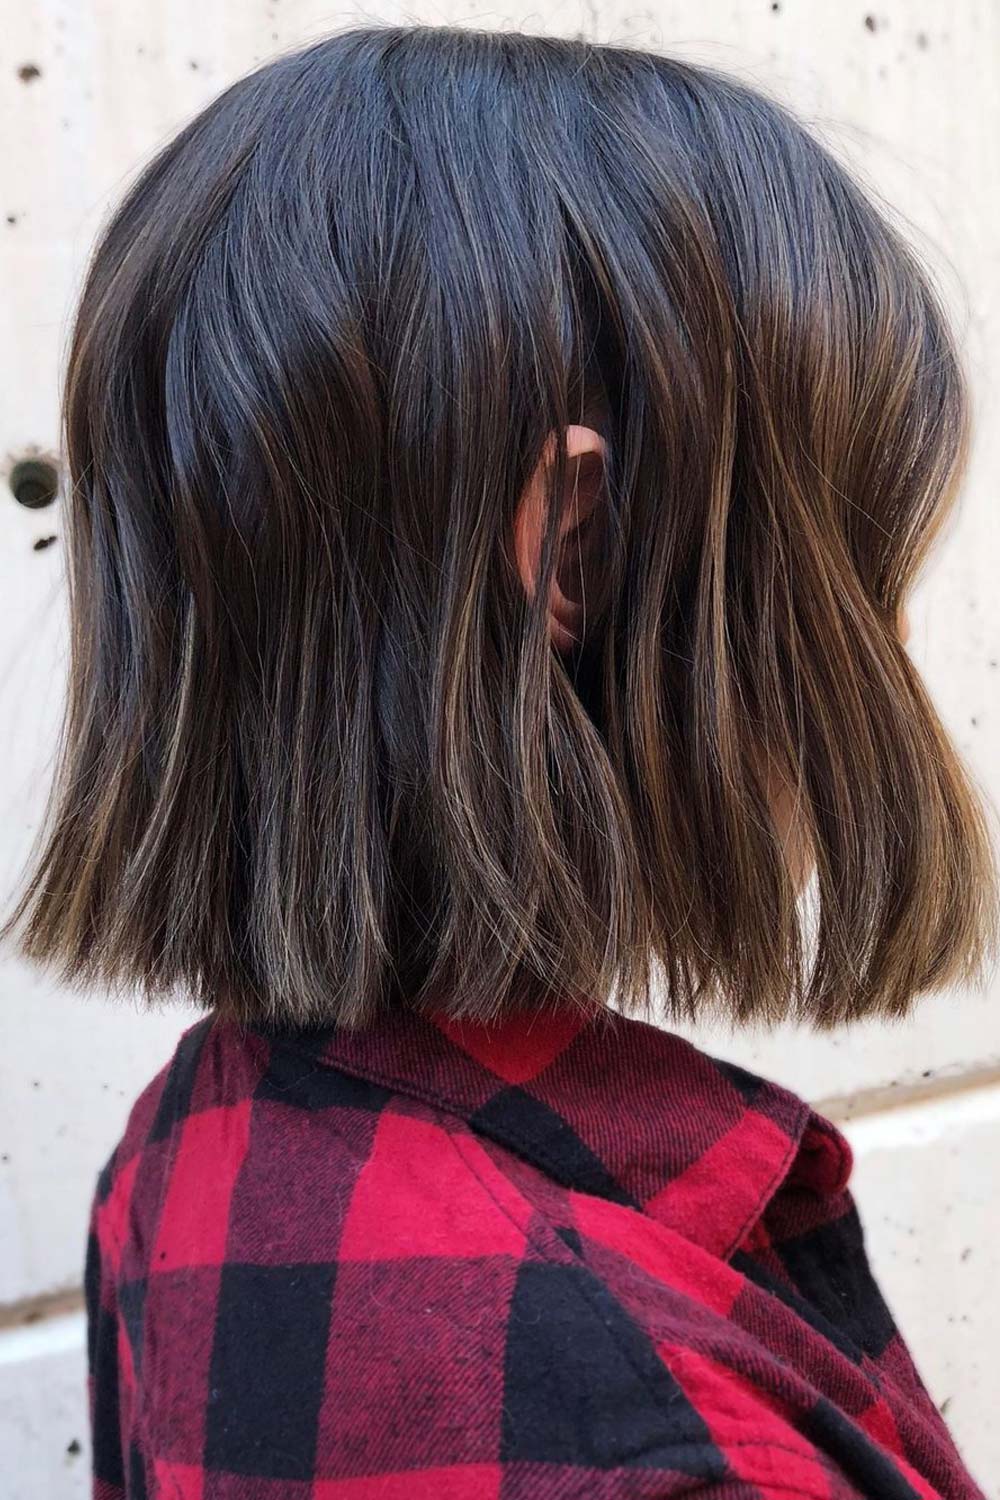 How To Style Your Hair Tomboy Outfits Bob Straight Ends Haircut 